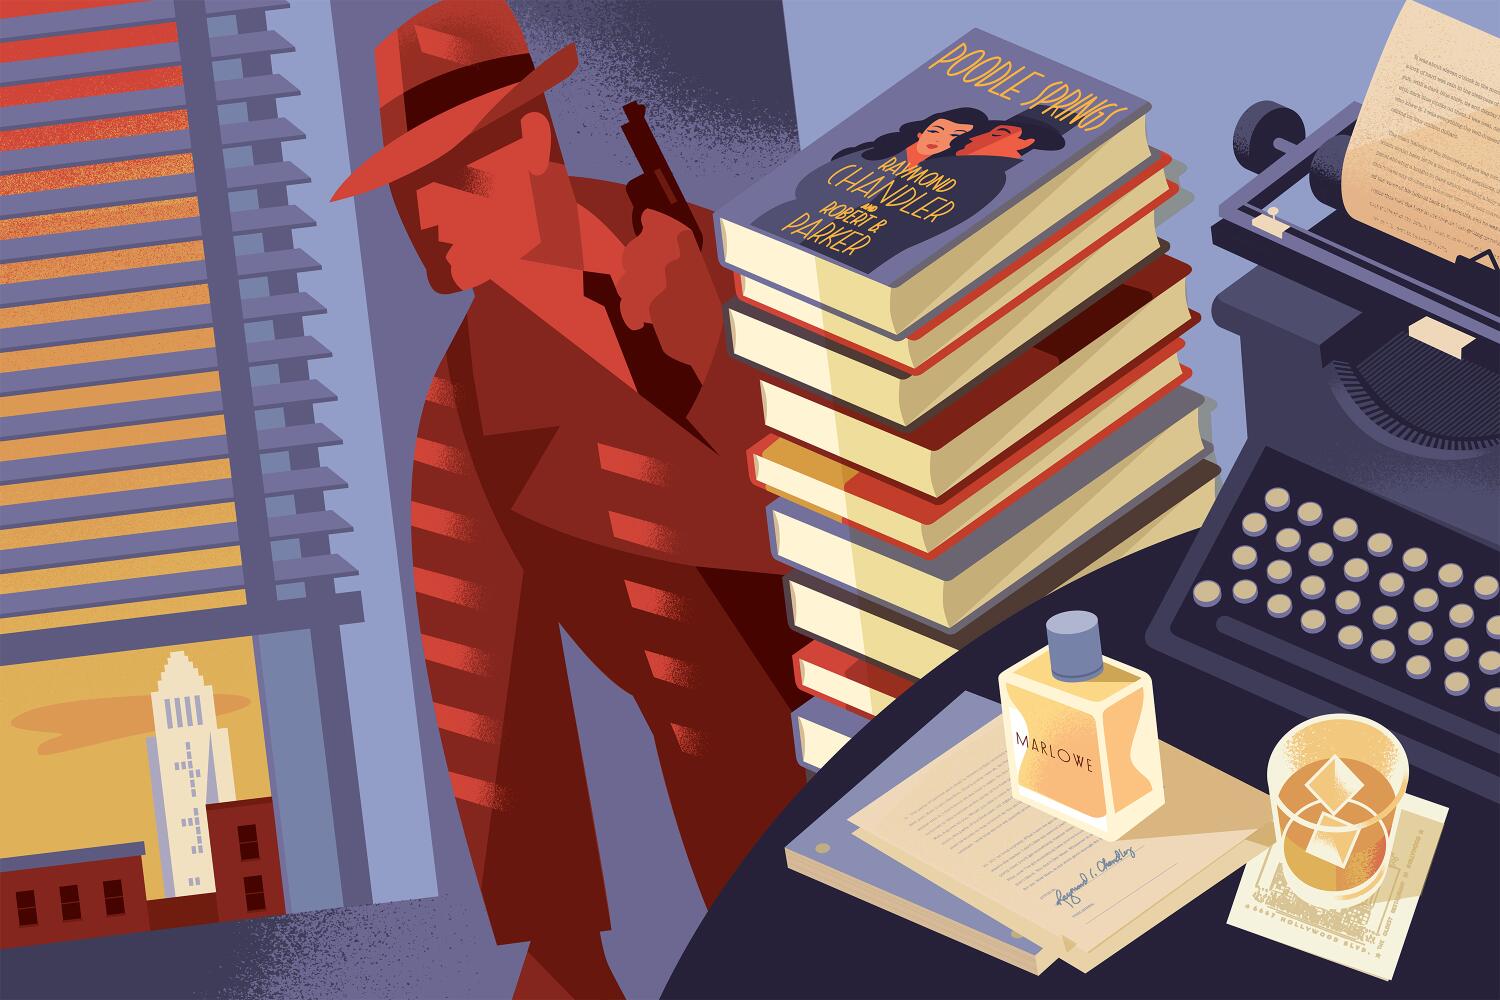 Philip Marlowe perfume, anyone? Raymond Chandler's estate revives its hero, for better or worse